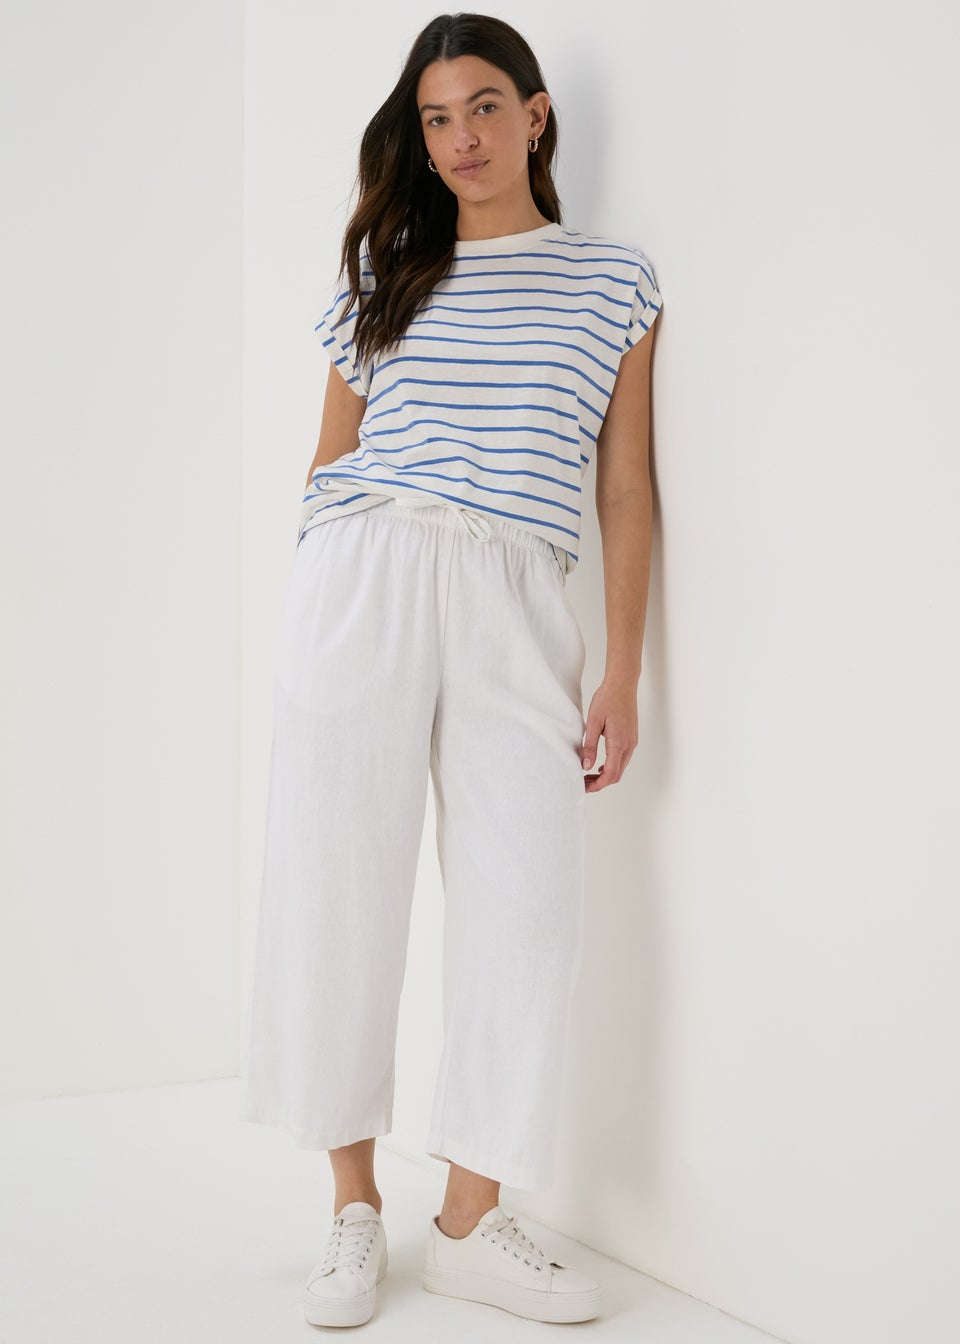 Cream & Blue Stripe Relaxed Fit T-Shirt